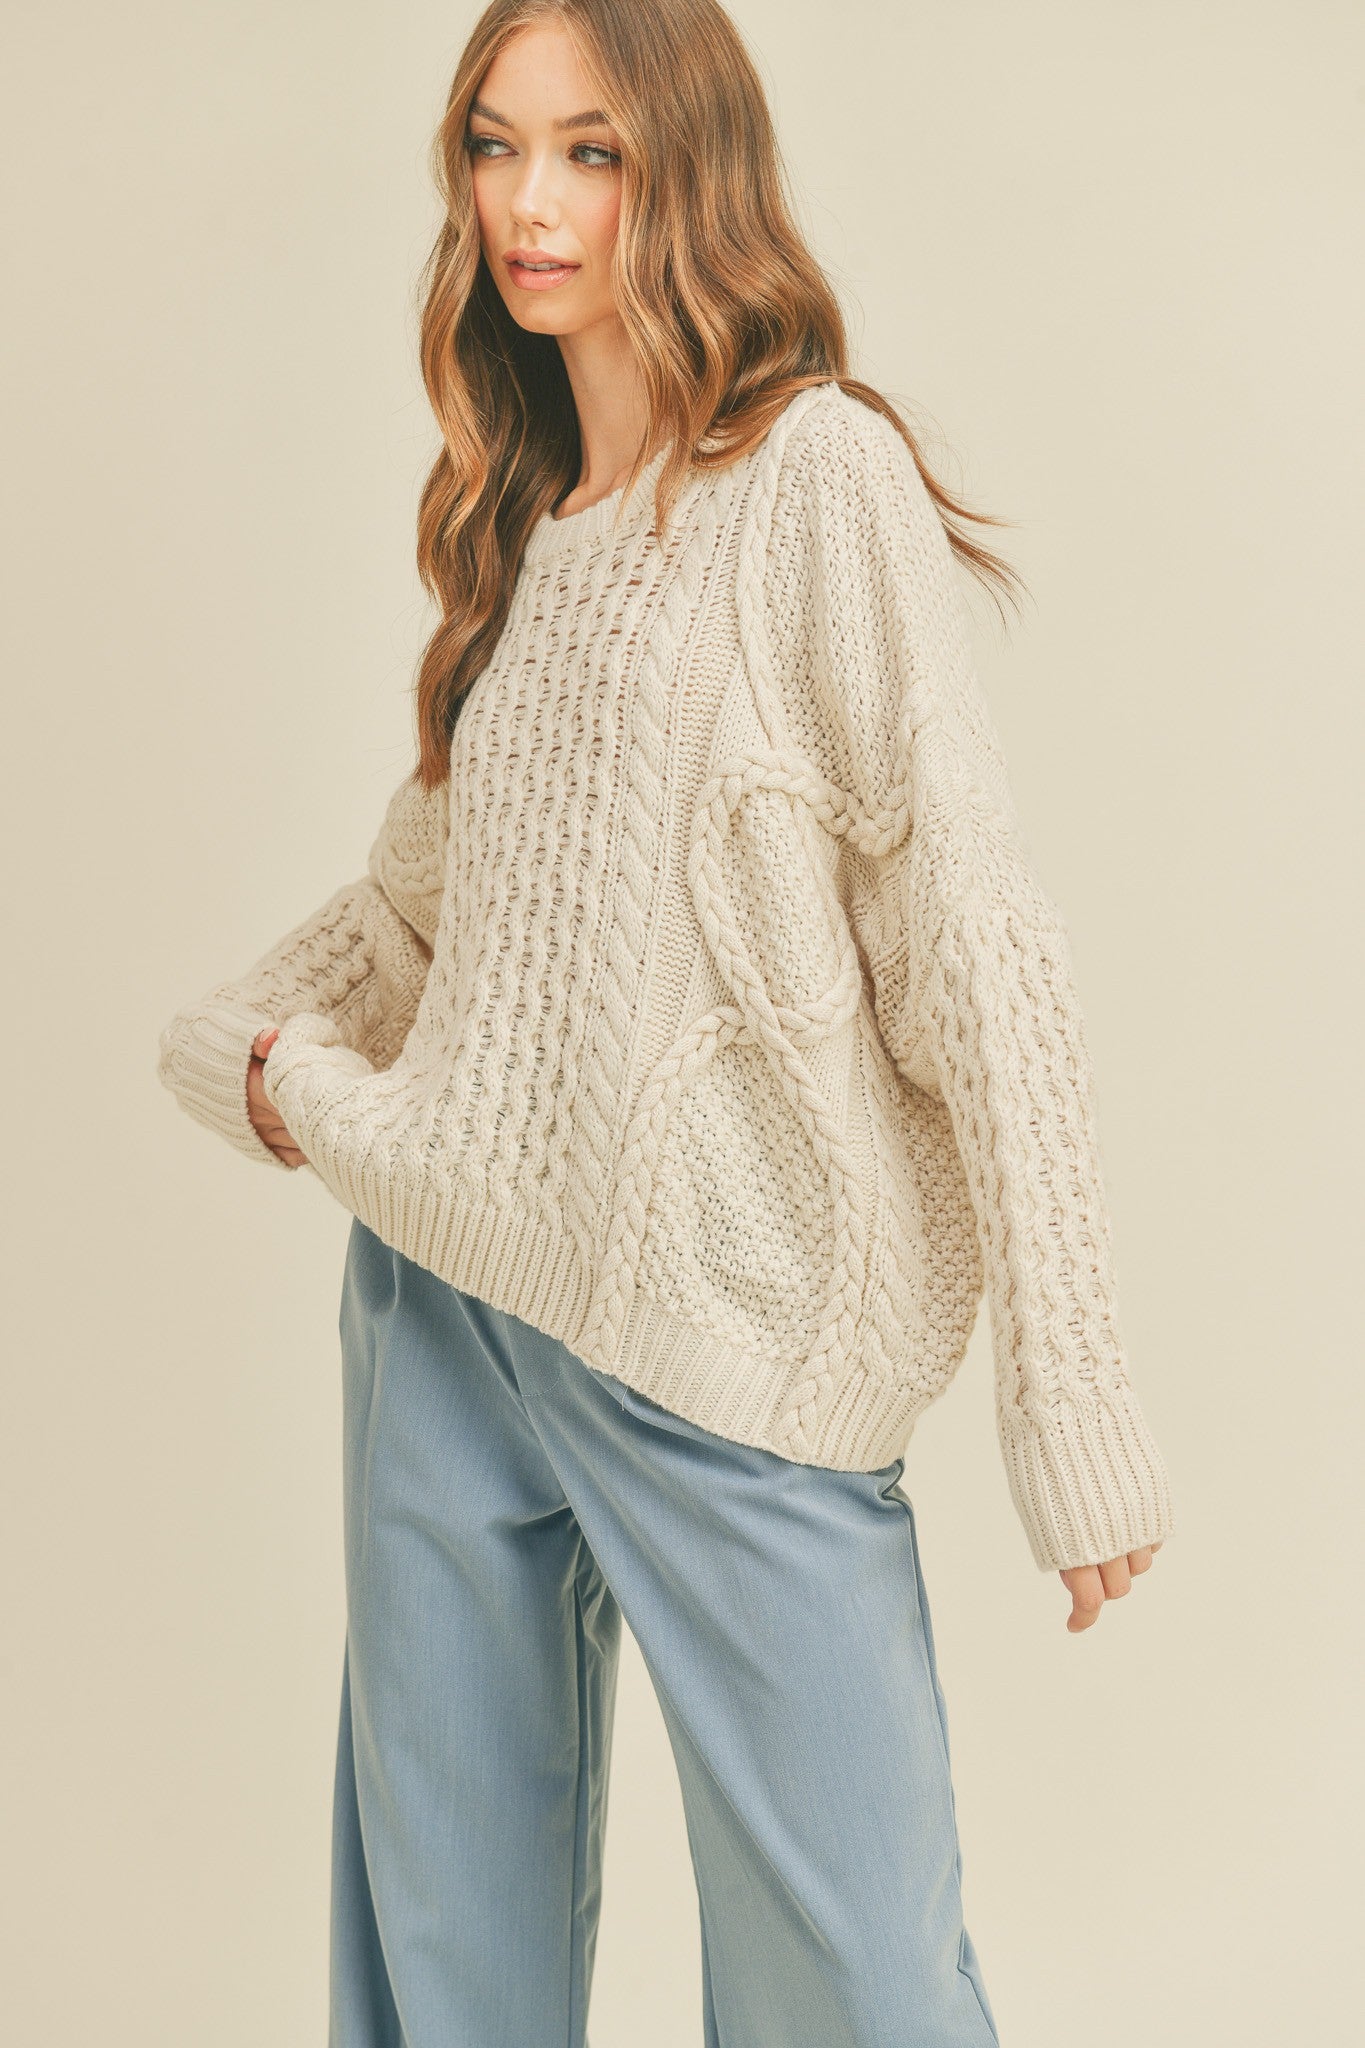 Braided Knit Sweater in Oatmeal